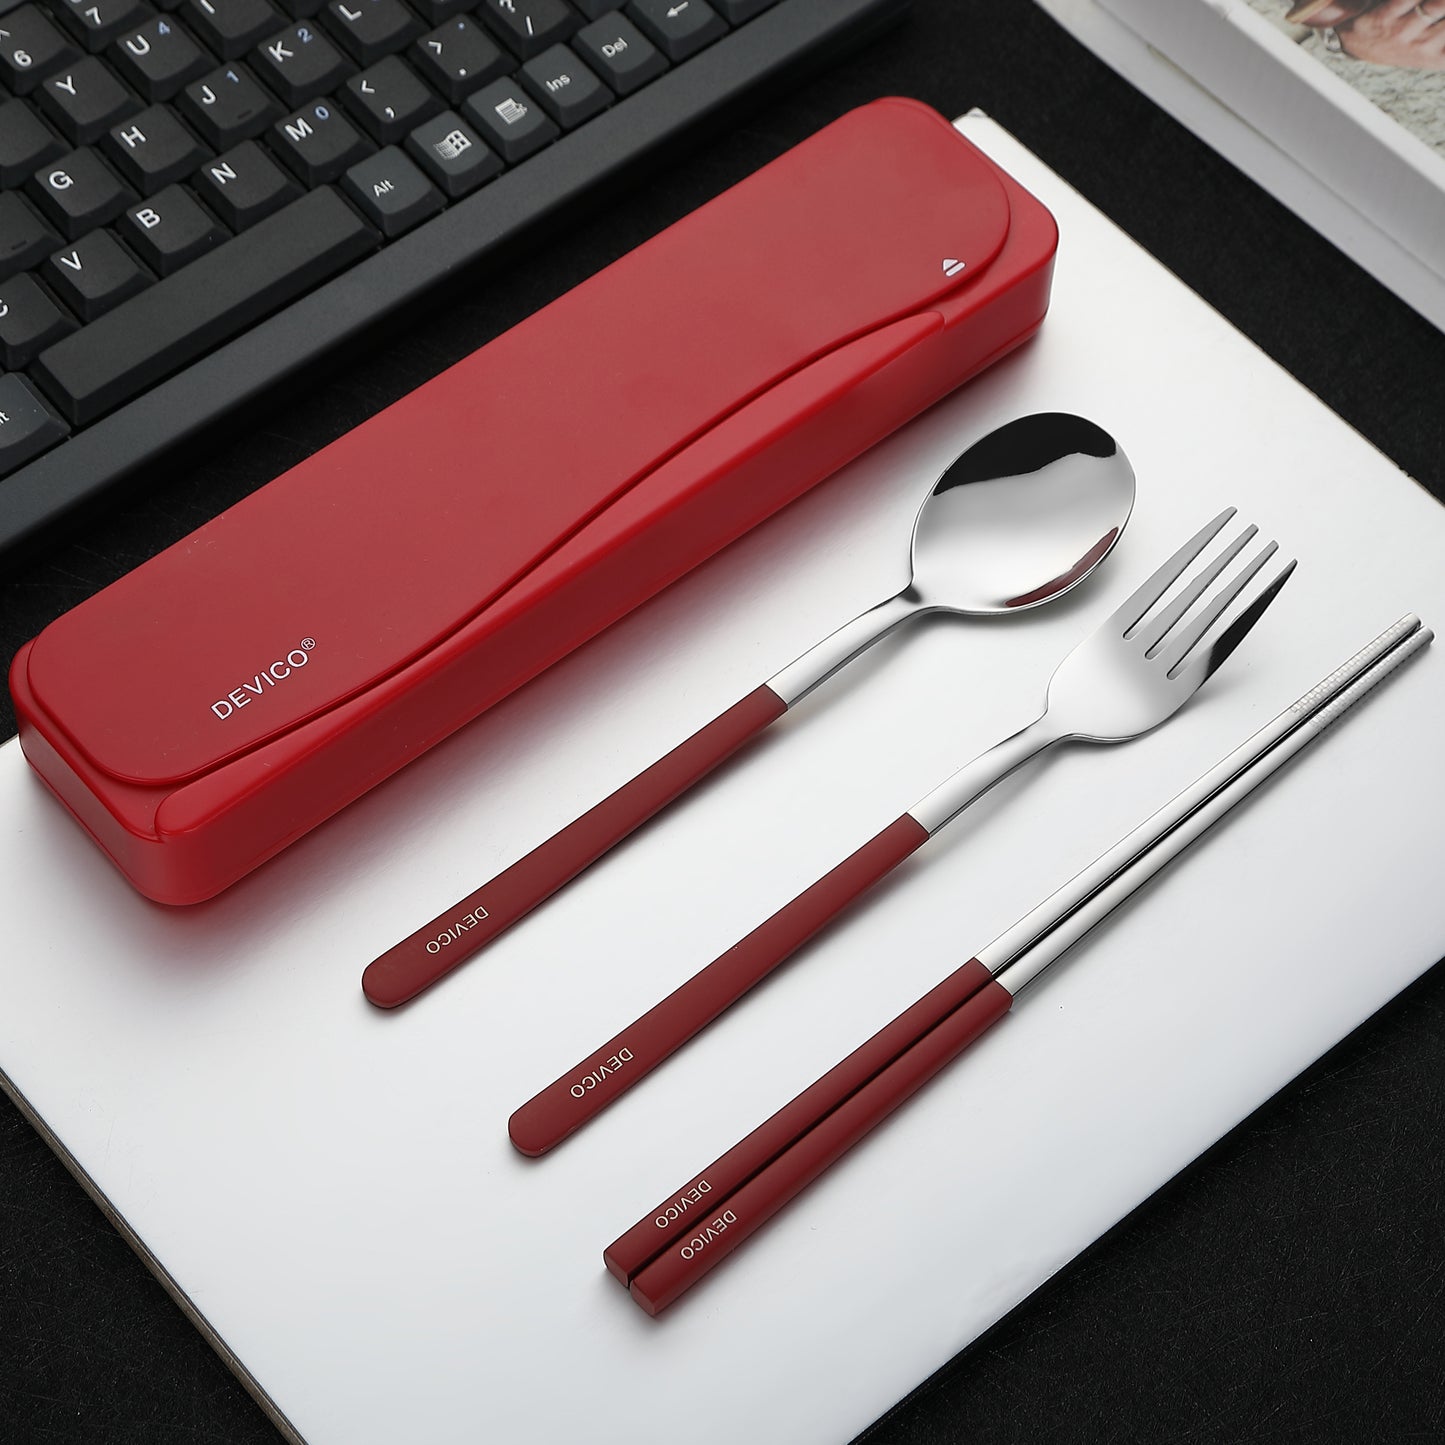 DEVICO Travel Utensils, 18/8 Stainless Steel 4pcs Cutlery Set Portable Camp Reusable Flatware Silverware, Include Fork Spoon Chopsticks with Case (Red)